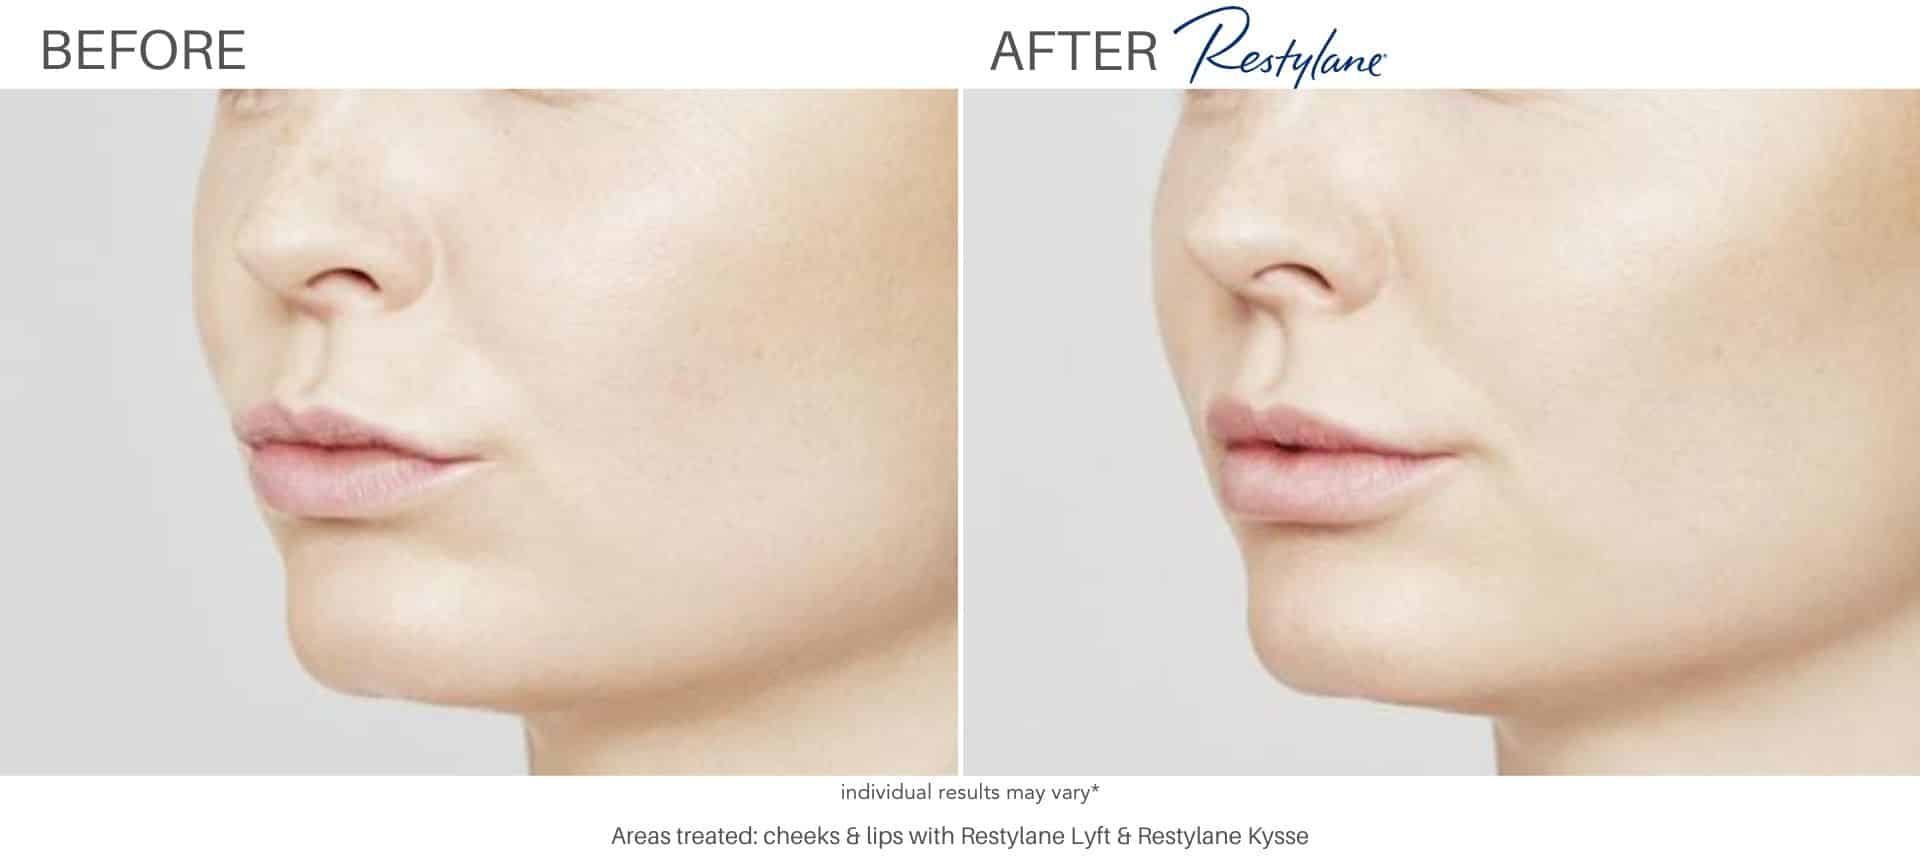 Restylane before and after results in Los Angeles, CA at Sculpt DTLA.